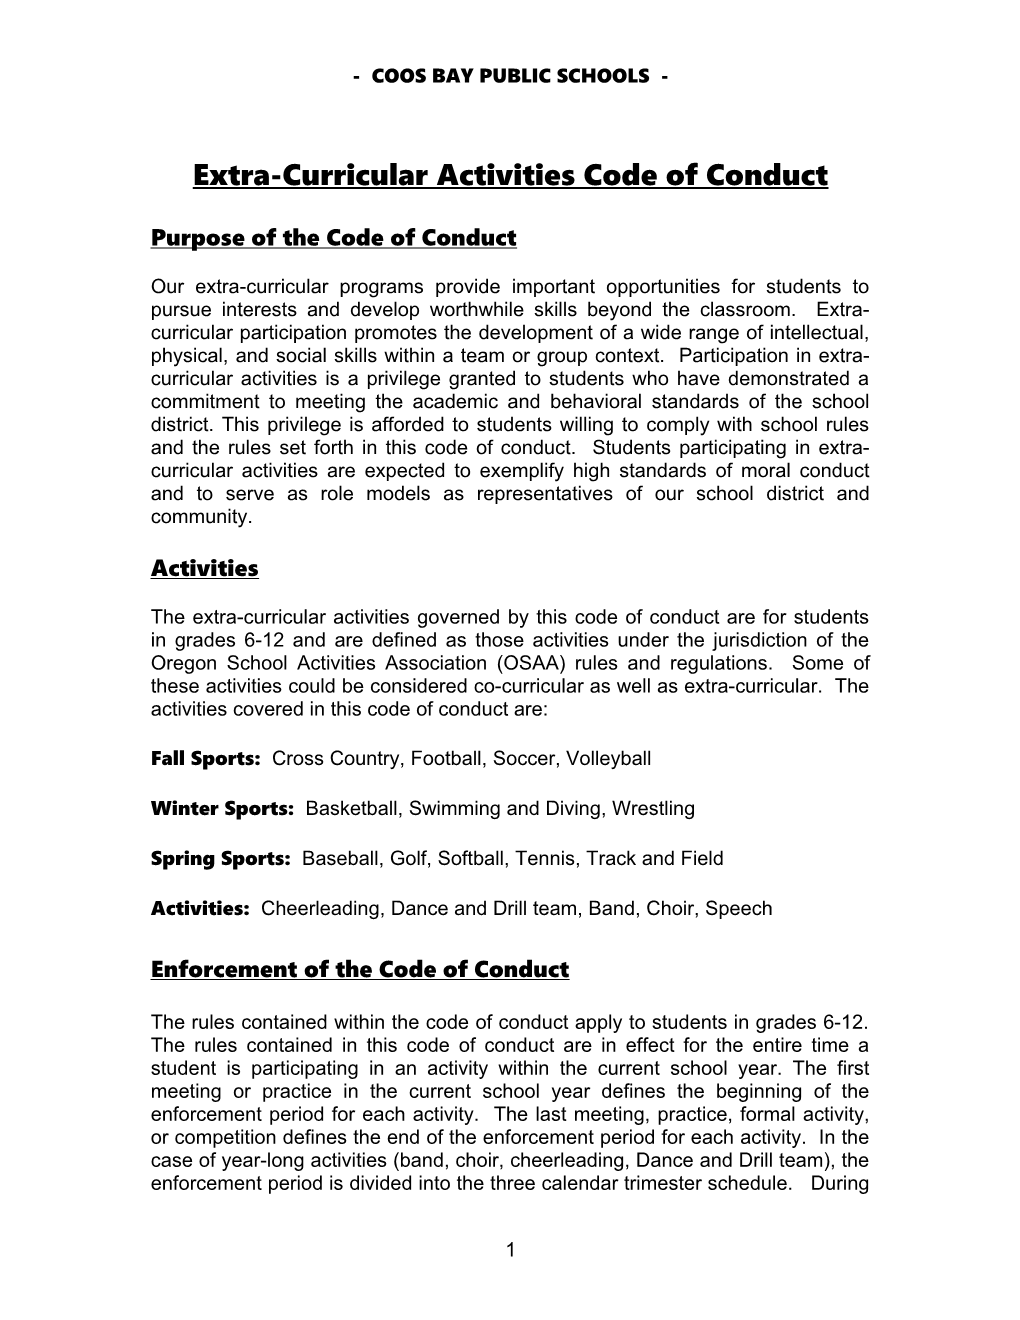 Extra-Curricular Code of Conduct